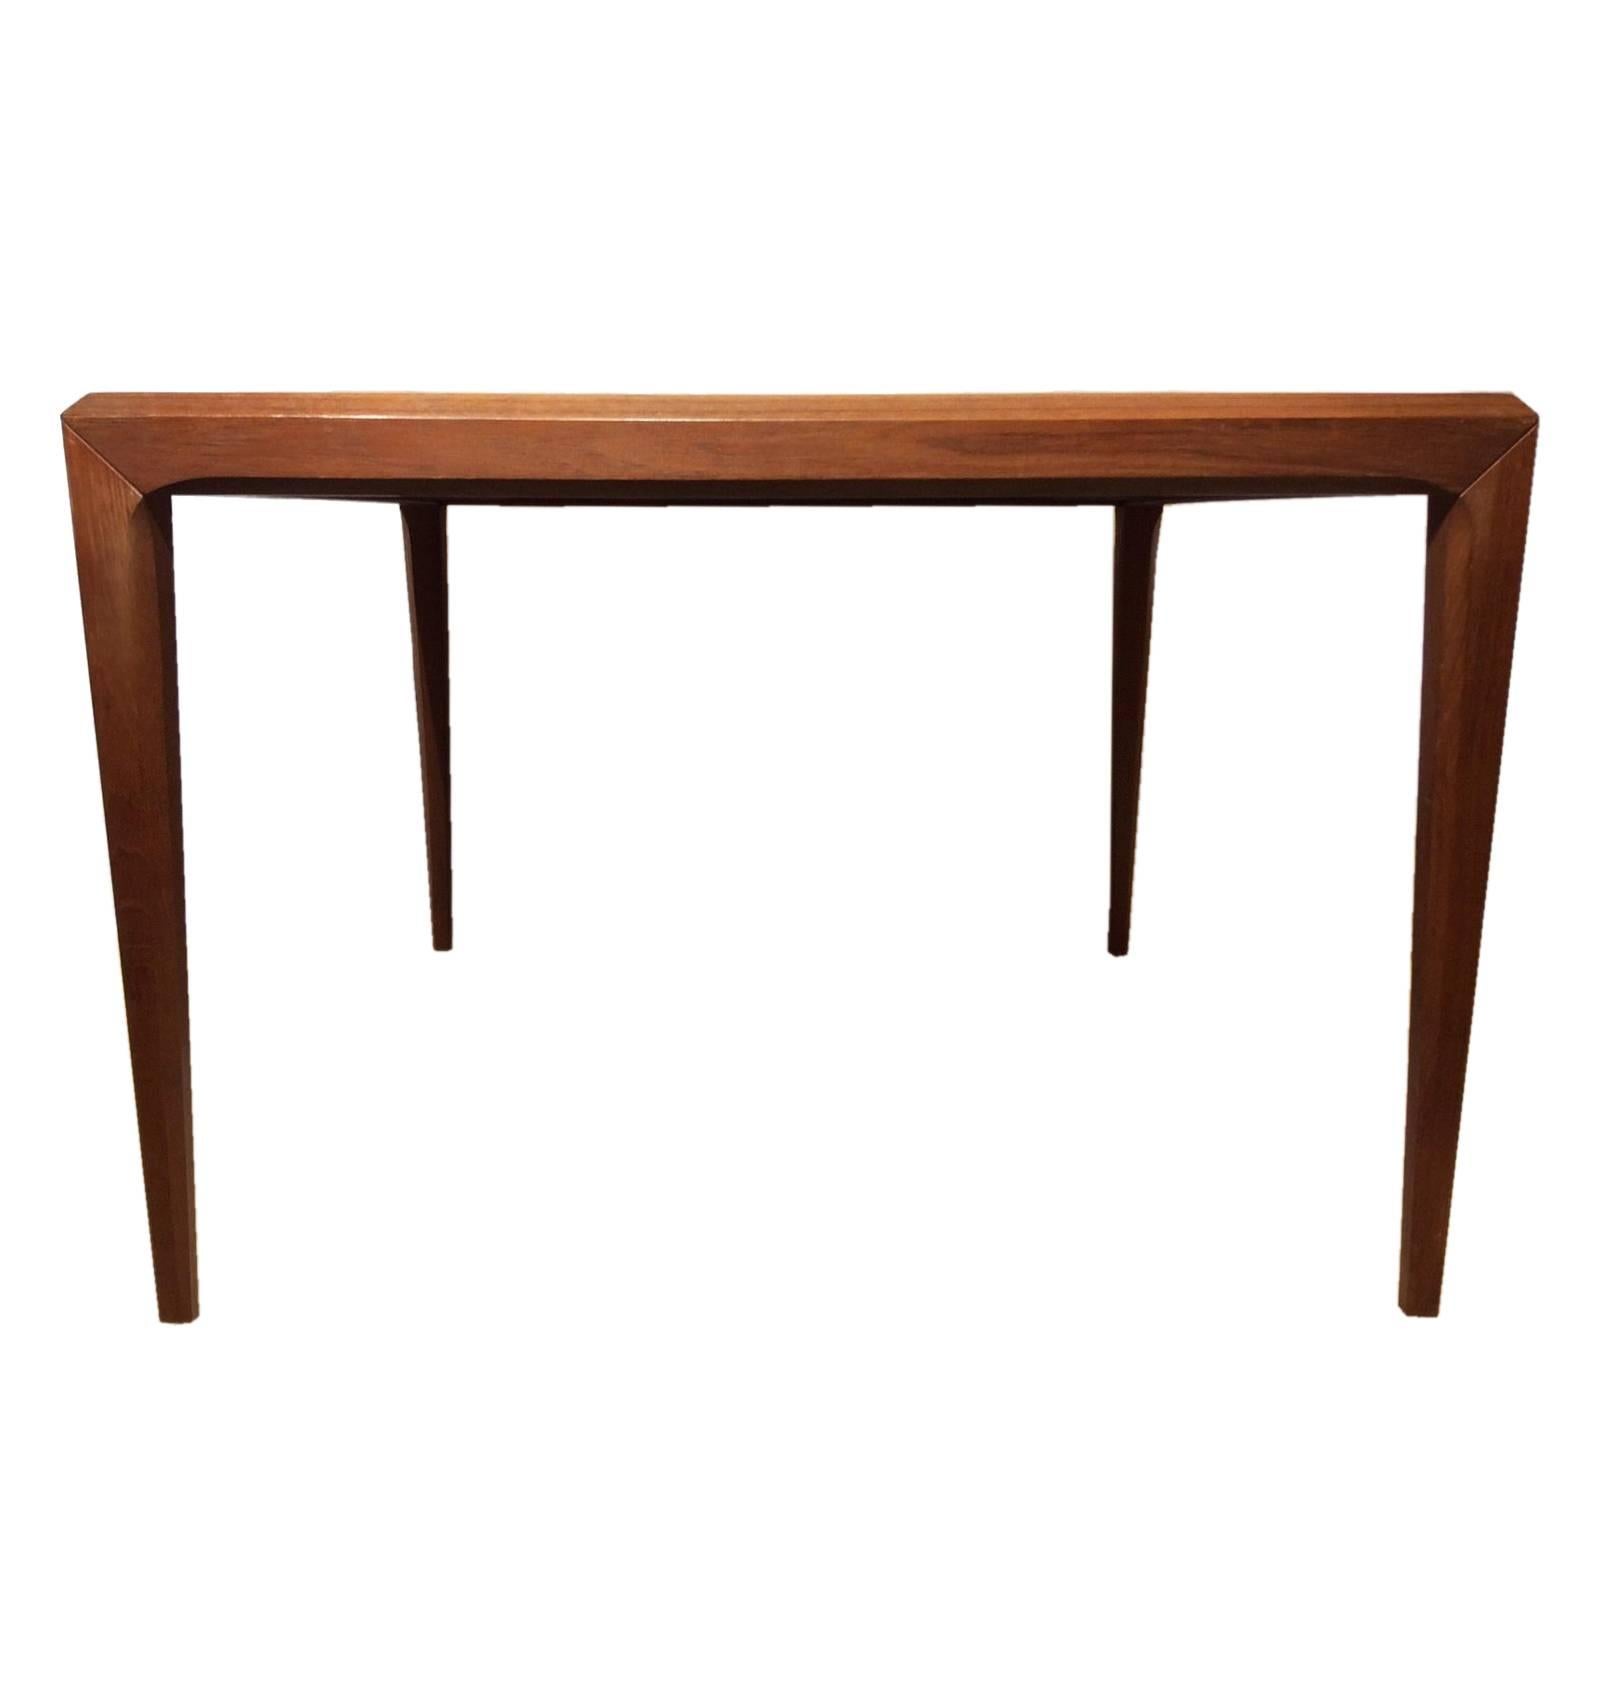 20th Century Danish Mid-Century Cubic Teak Coffee Table by Johannes Andersen for Silkeborg For Sale